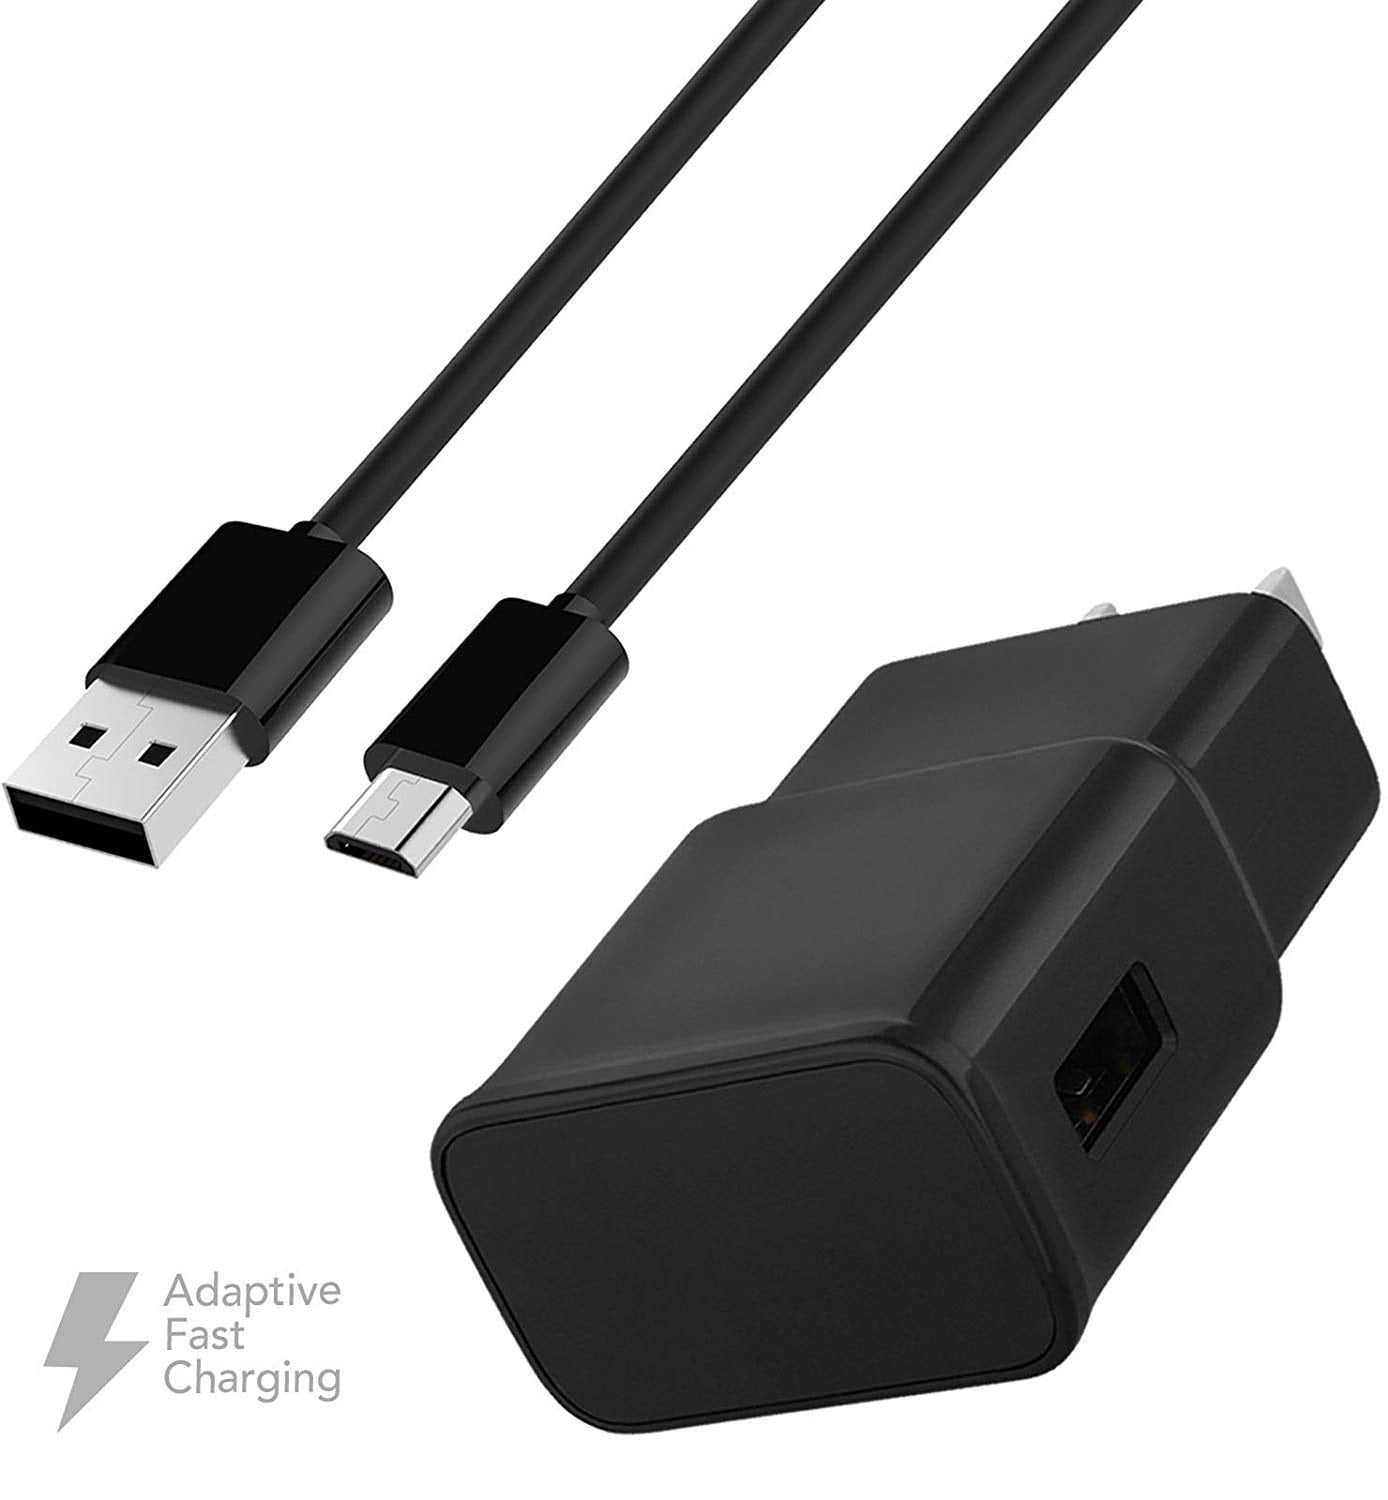 Quick Charge 3.0 nova Wall Charger Black USB Type-C Data Cable 18W. 